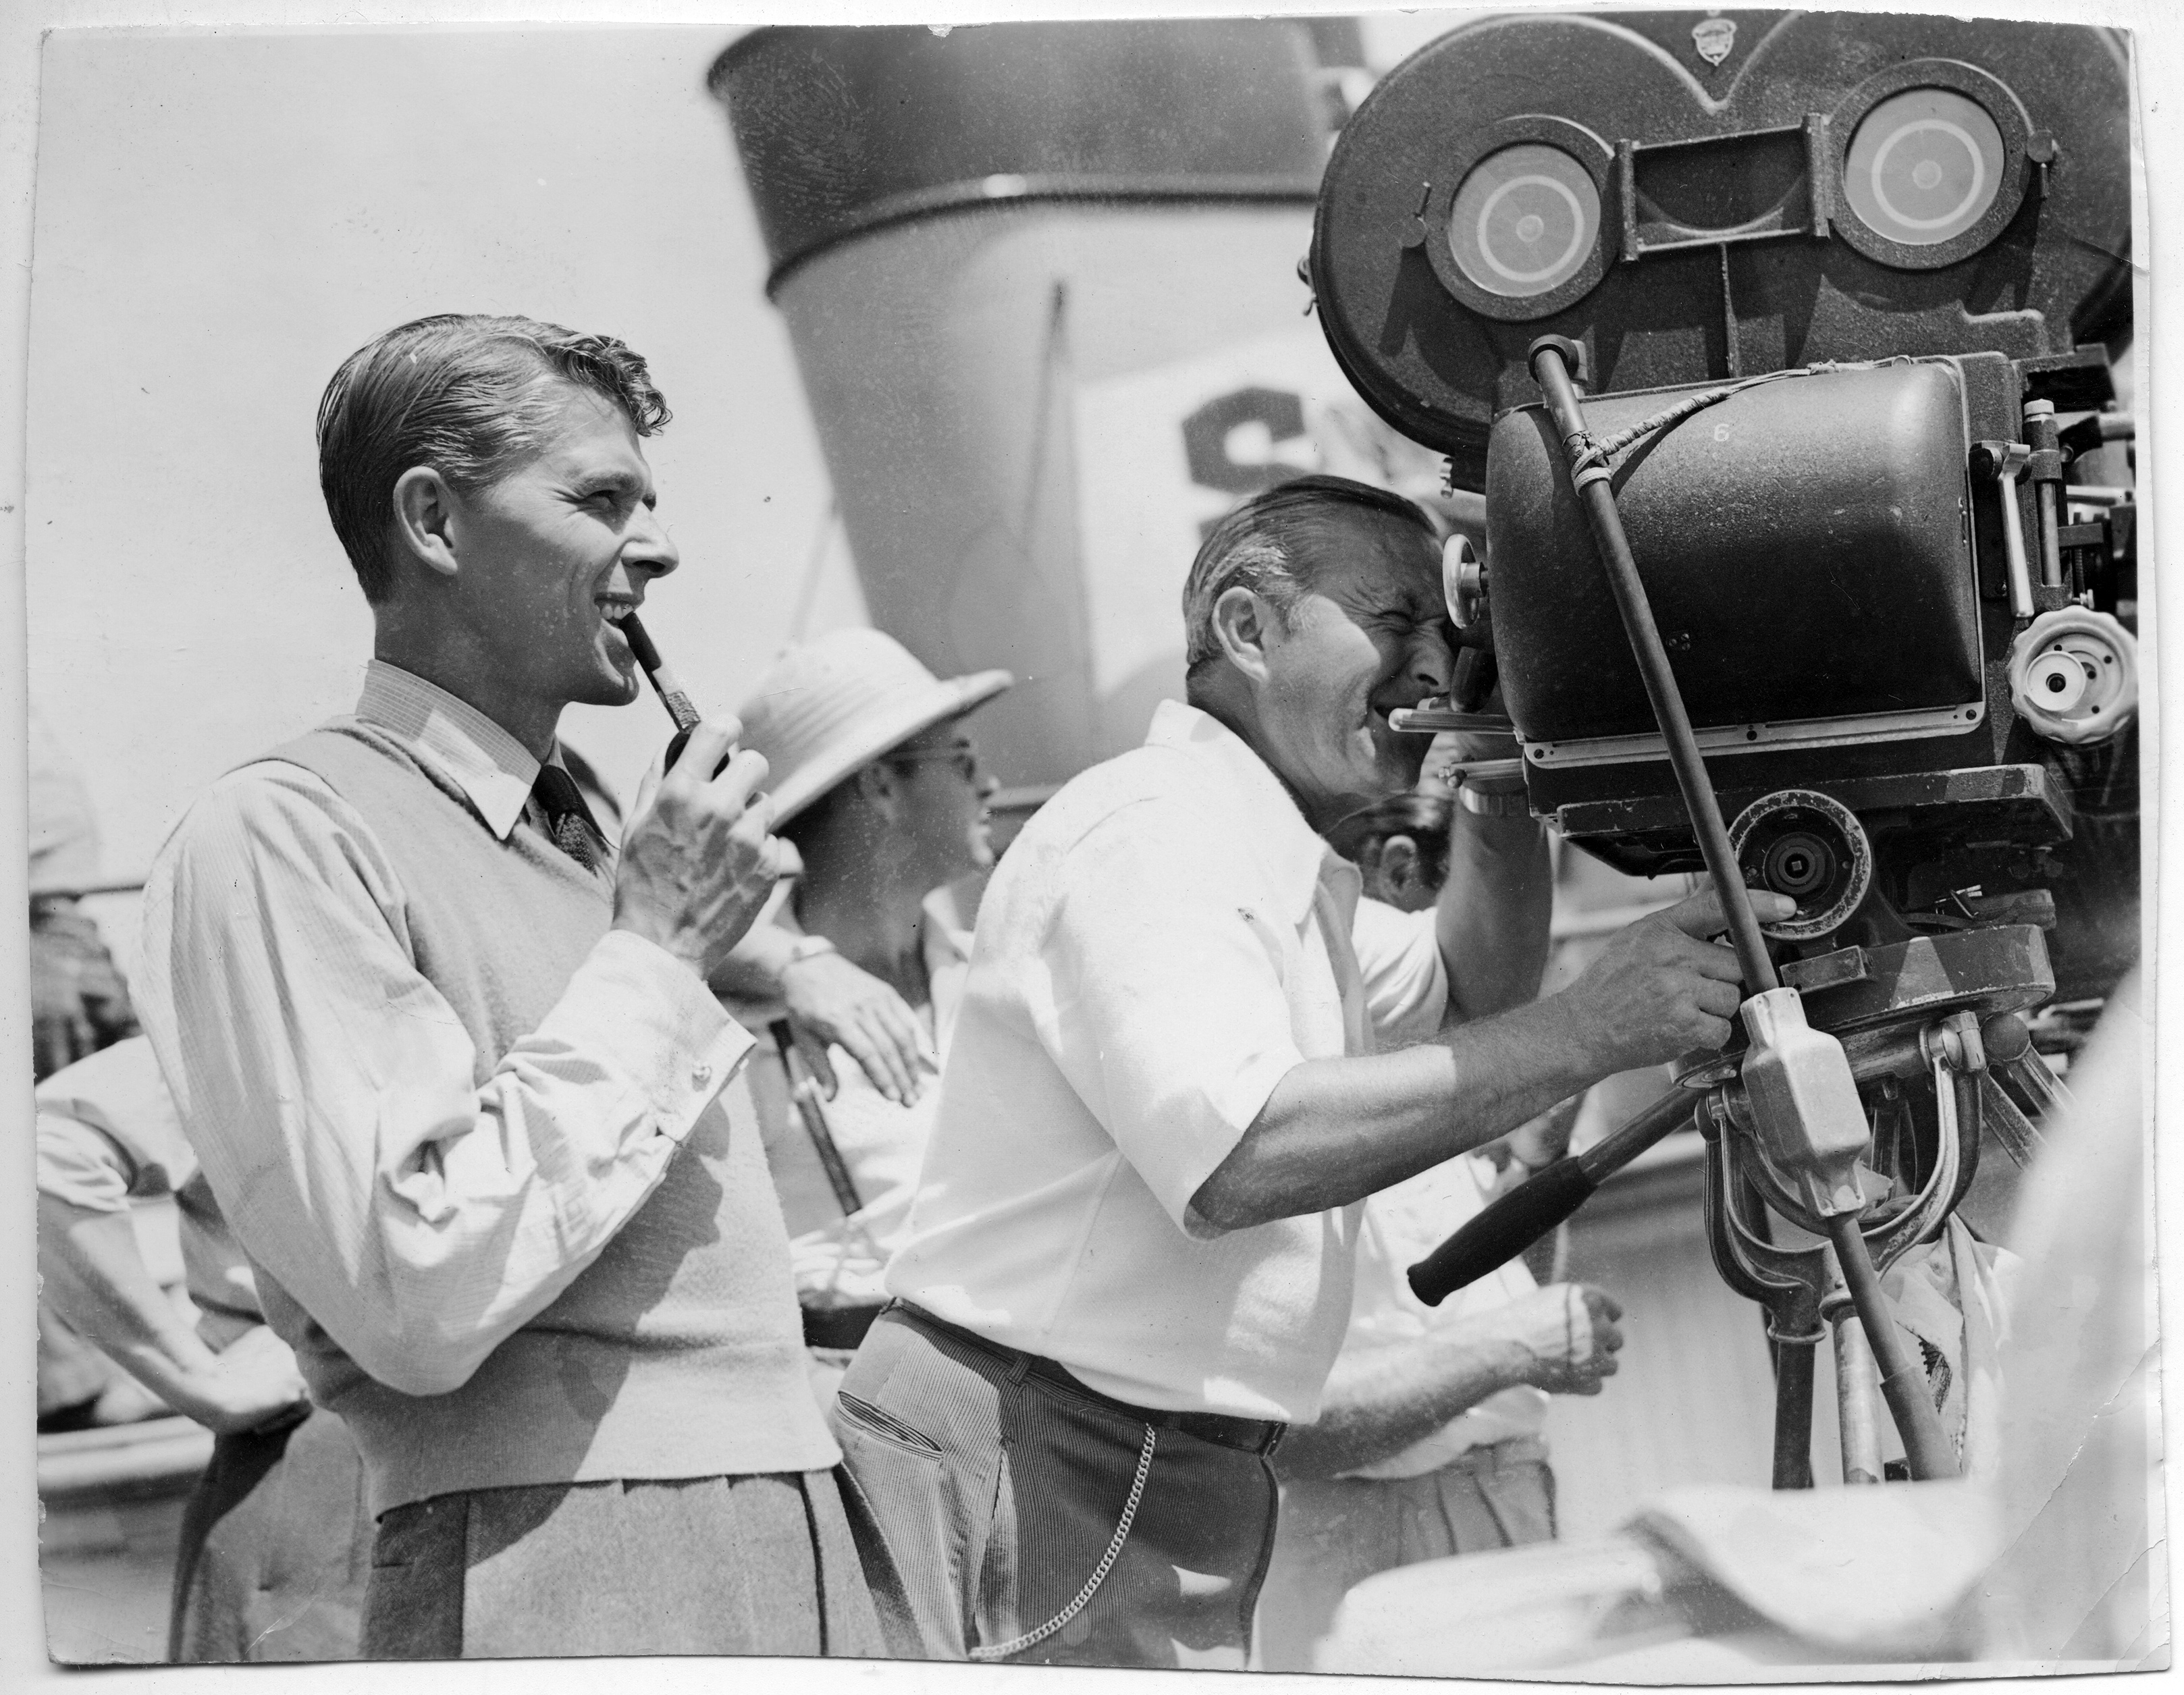 Ronald Reagan (with pipe) and Director Arthur Edeson on set of movie “Tugboat Annie Sails Again” 